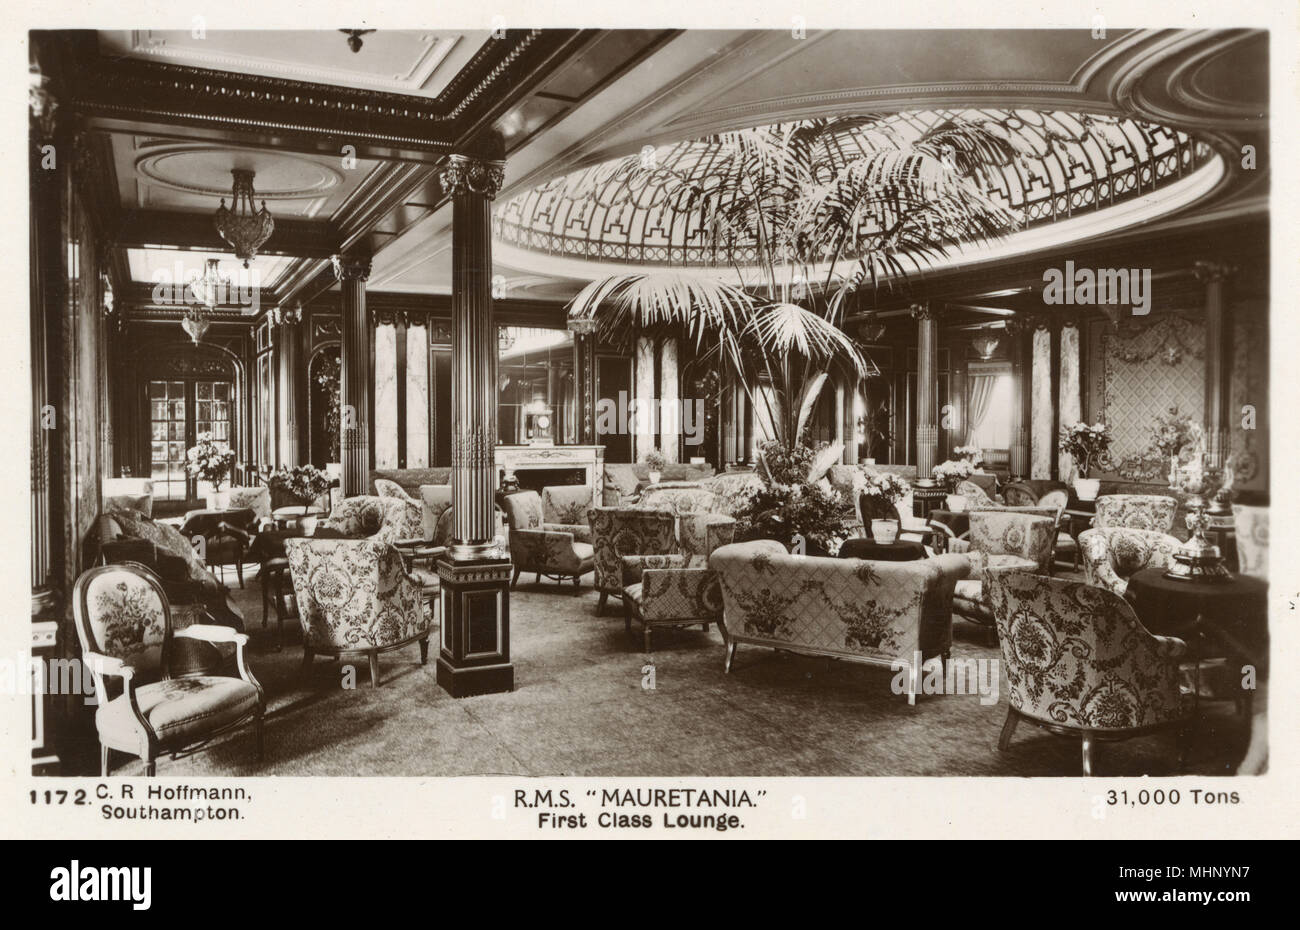 RMS Mauretania, First Class Lounge Date : vers 1910 Banque D'Images